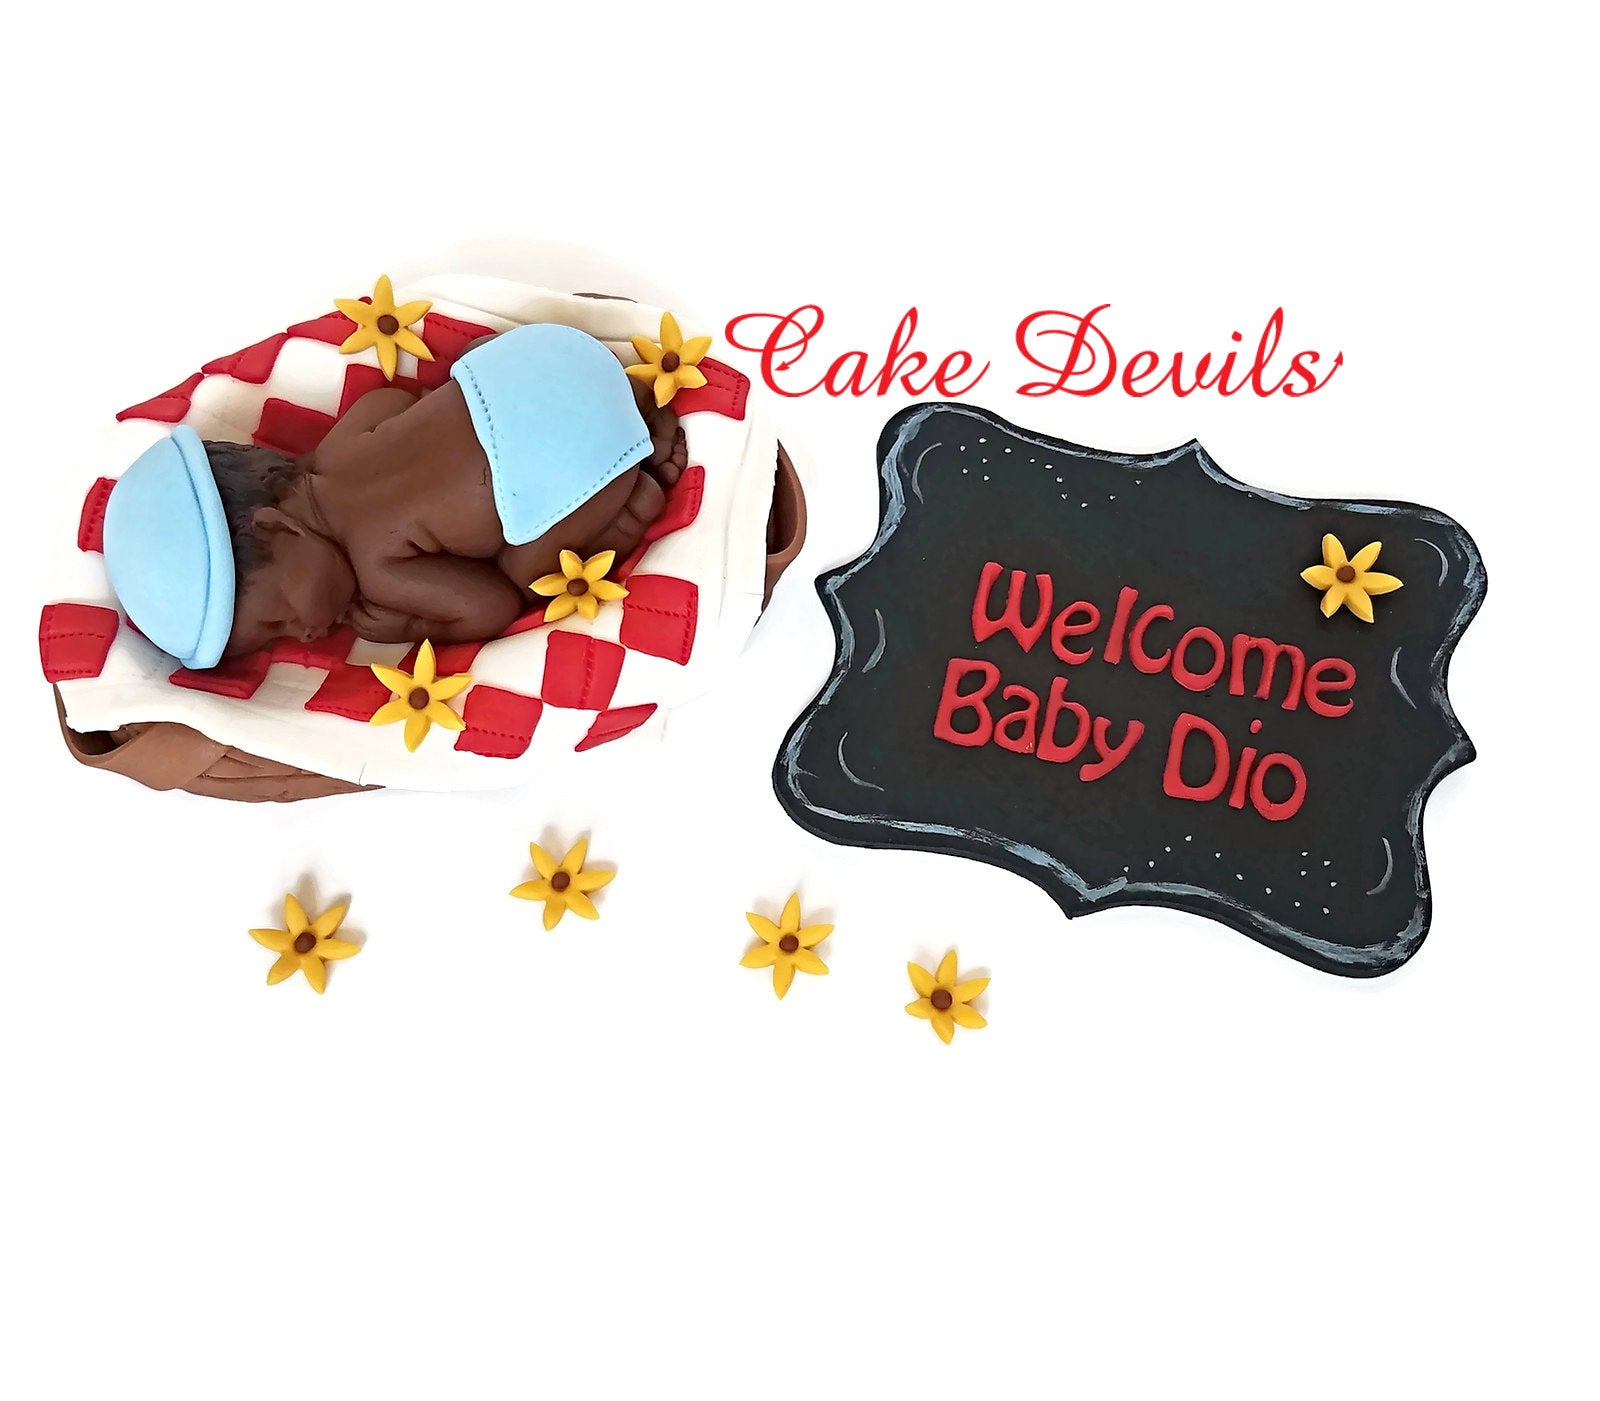 all Handmade with a Fondant Sleeping Baby in a Basket Picnic Baby Shower Cake Topper 